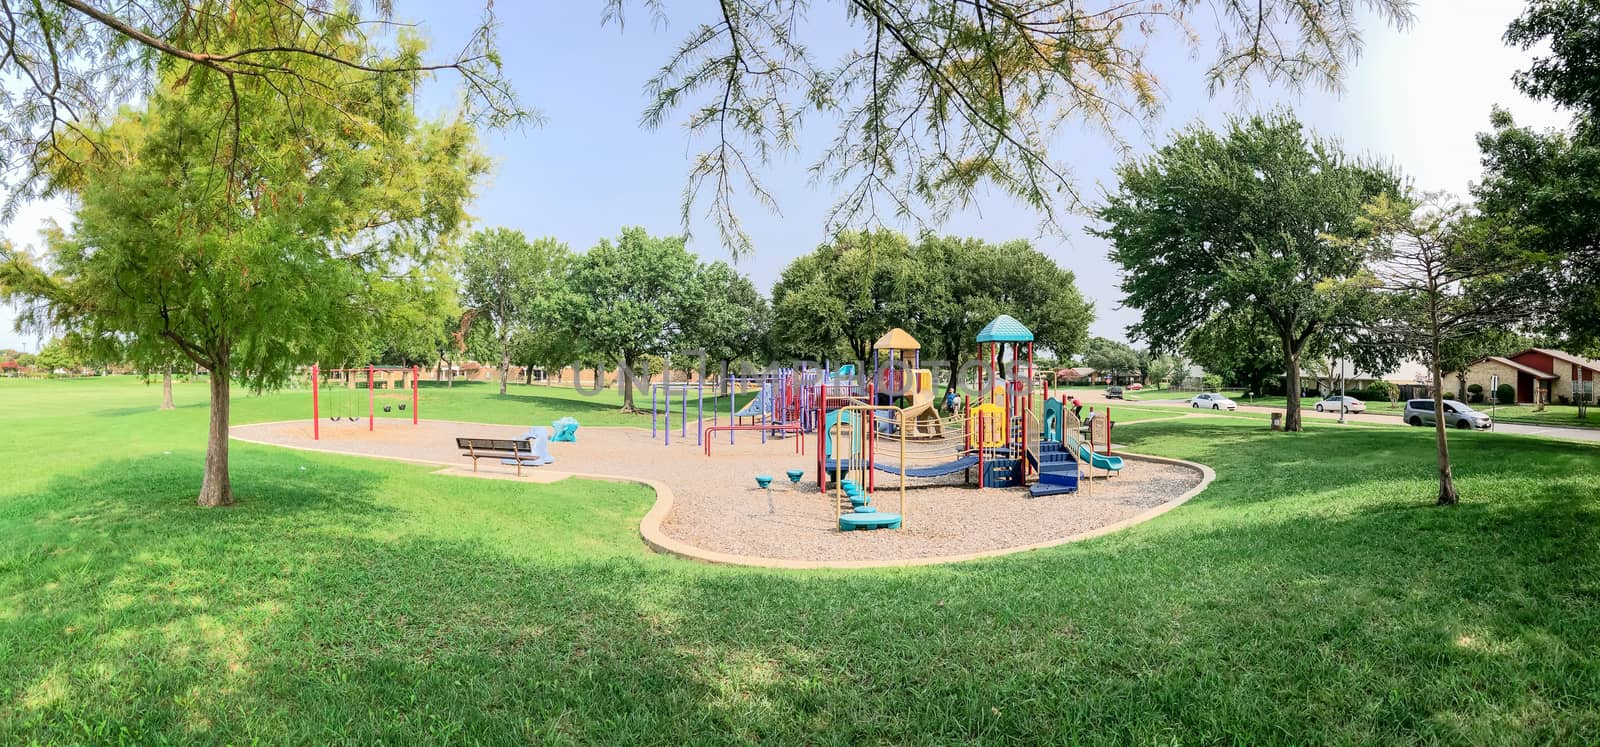 Panorama view colorful playground near residential neighborhood in Richardson, Texas, America. Community facility surrounded by large oak trees and green grass lawn